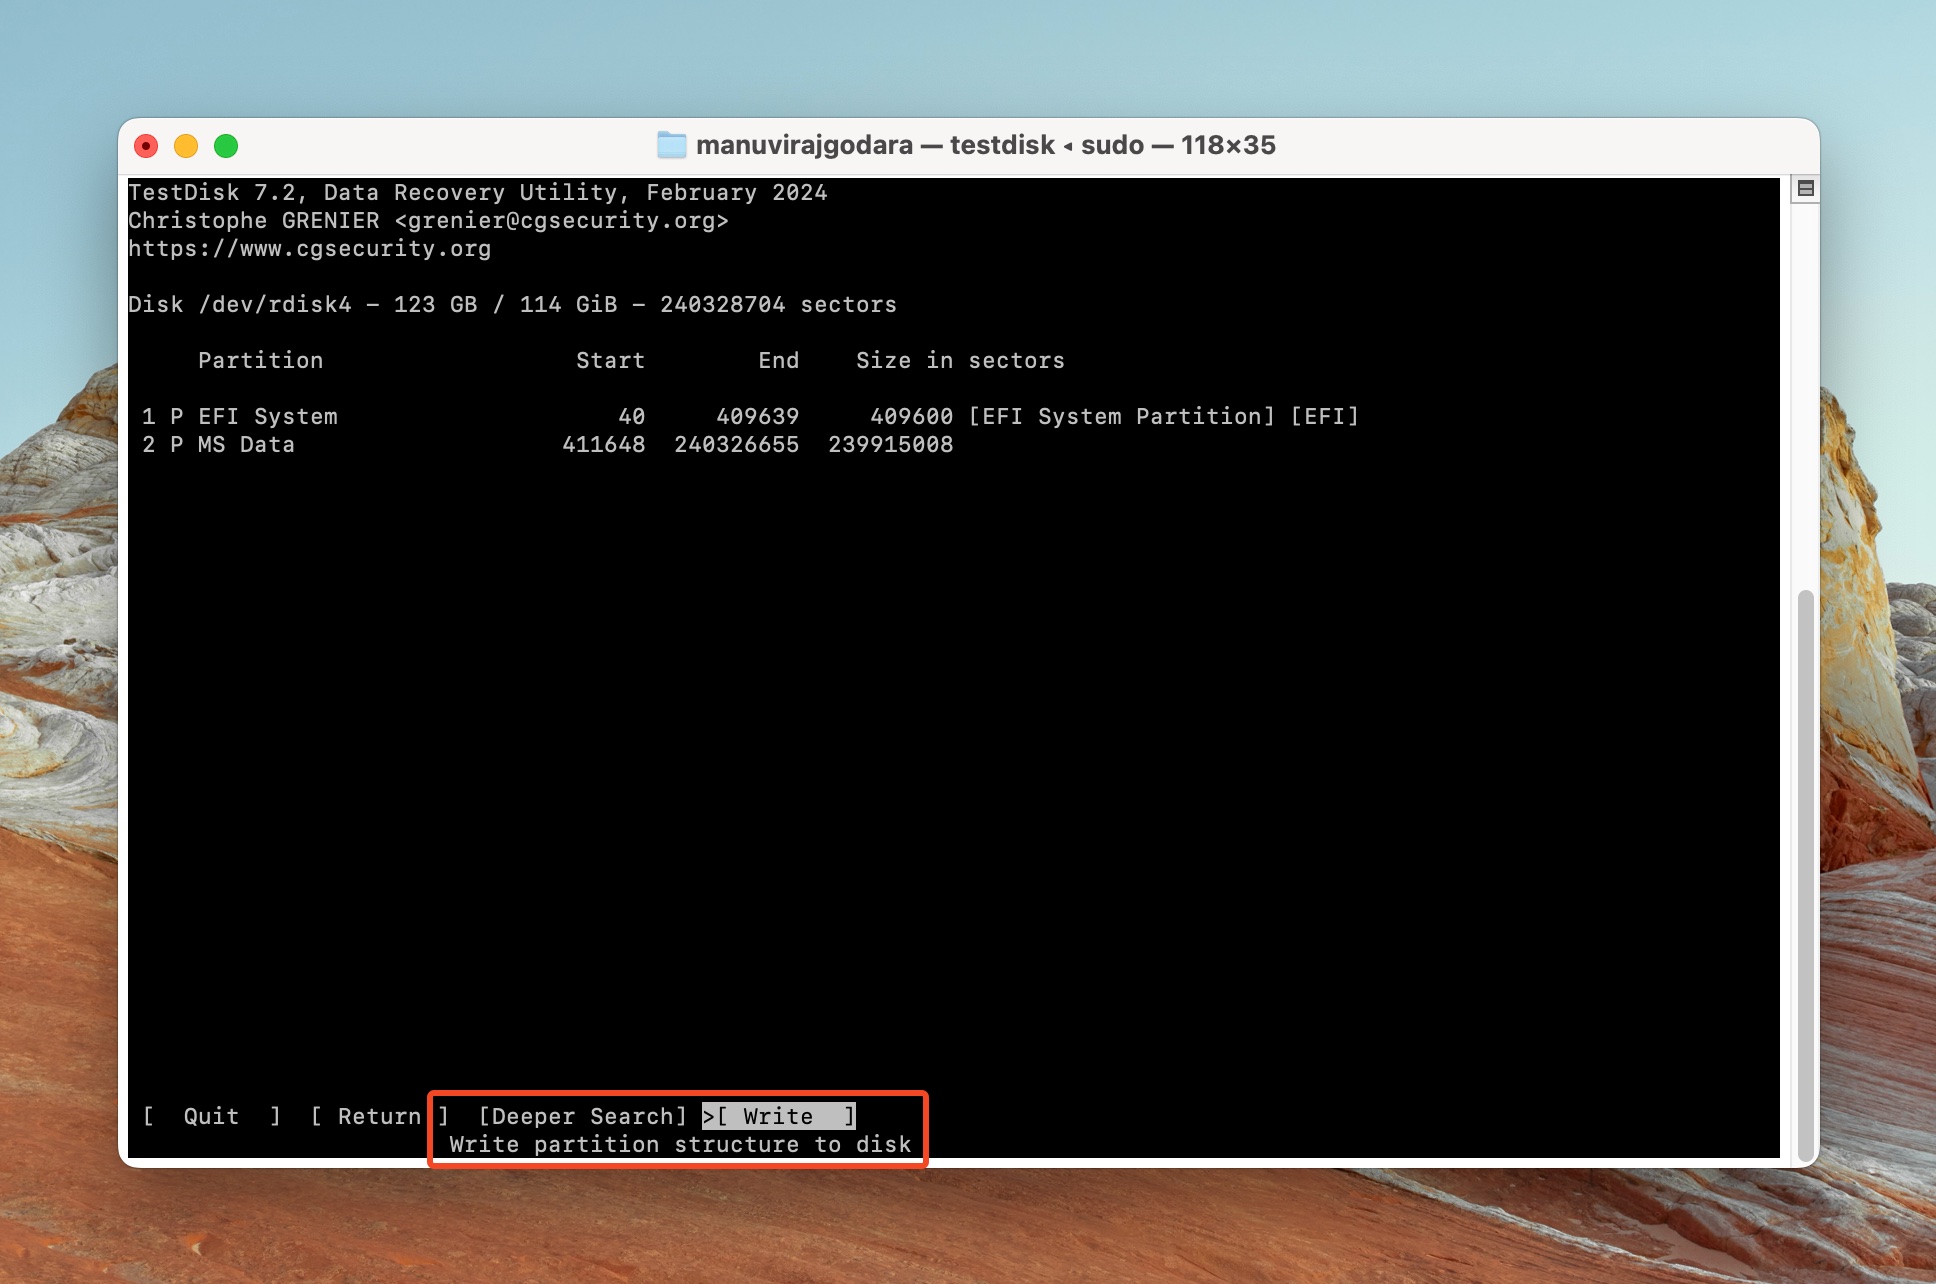 Terminal window open with TestDisk showing disk partition information, highlighting the command to write partition structure to disk.